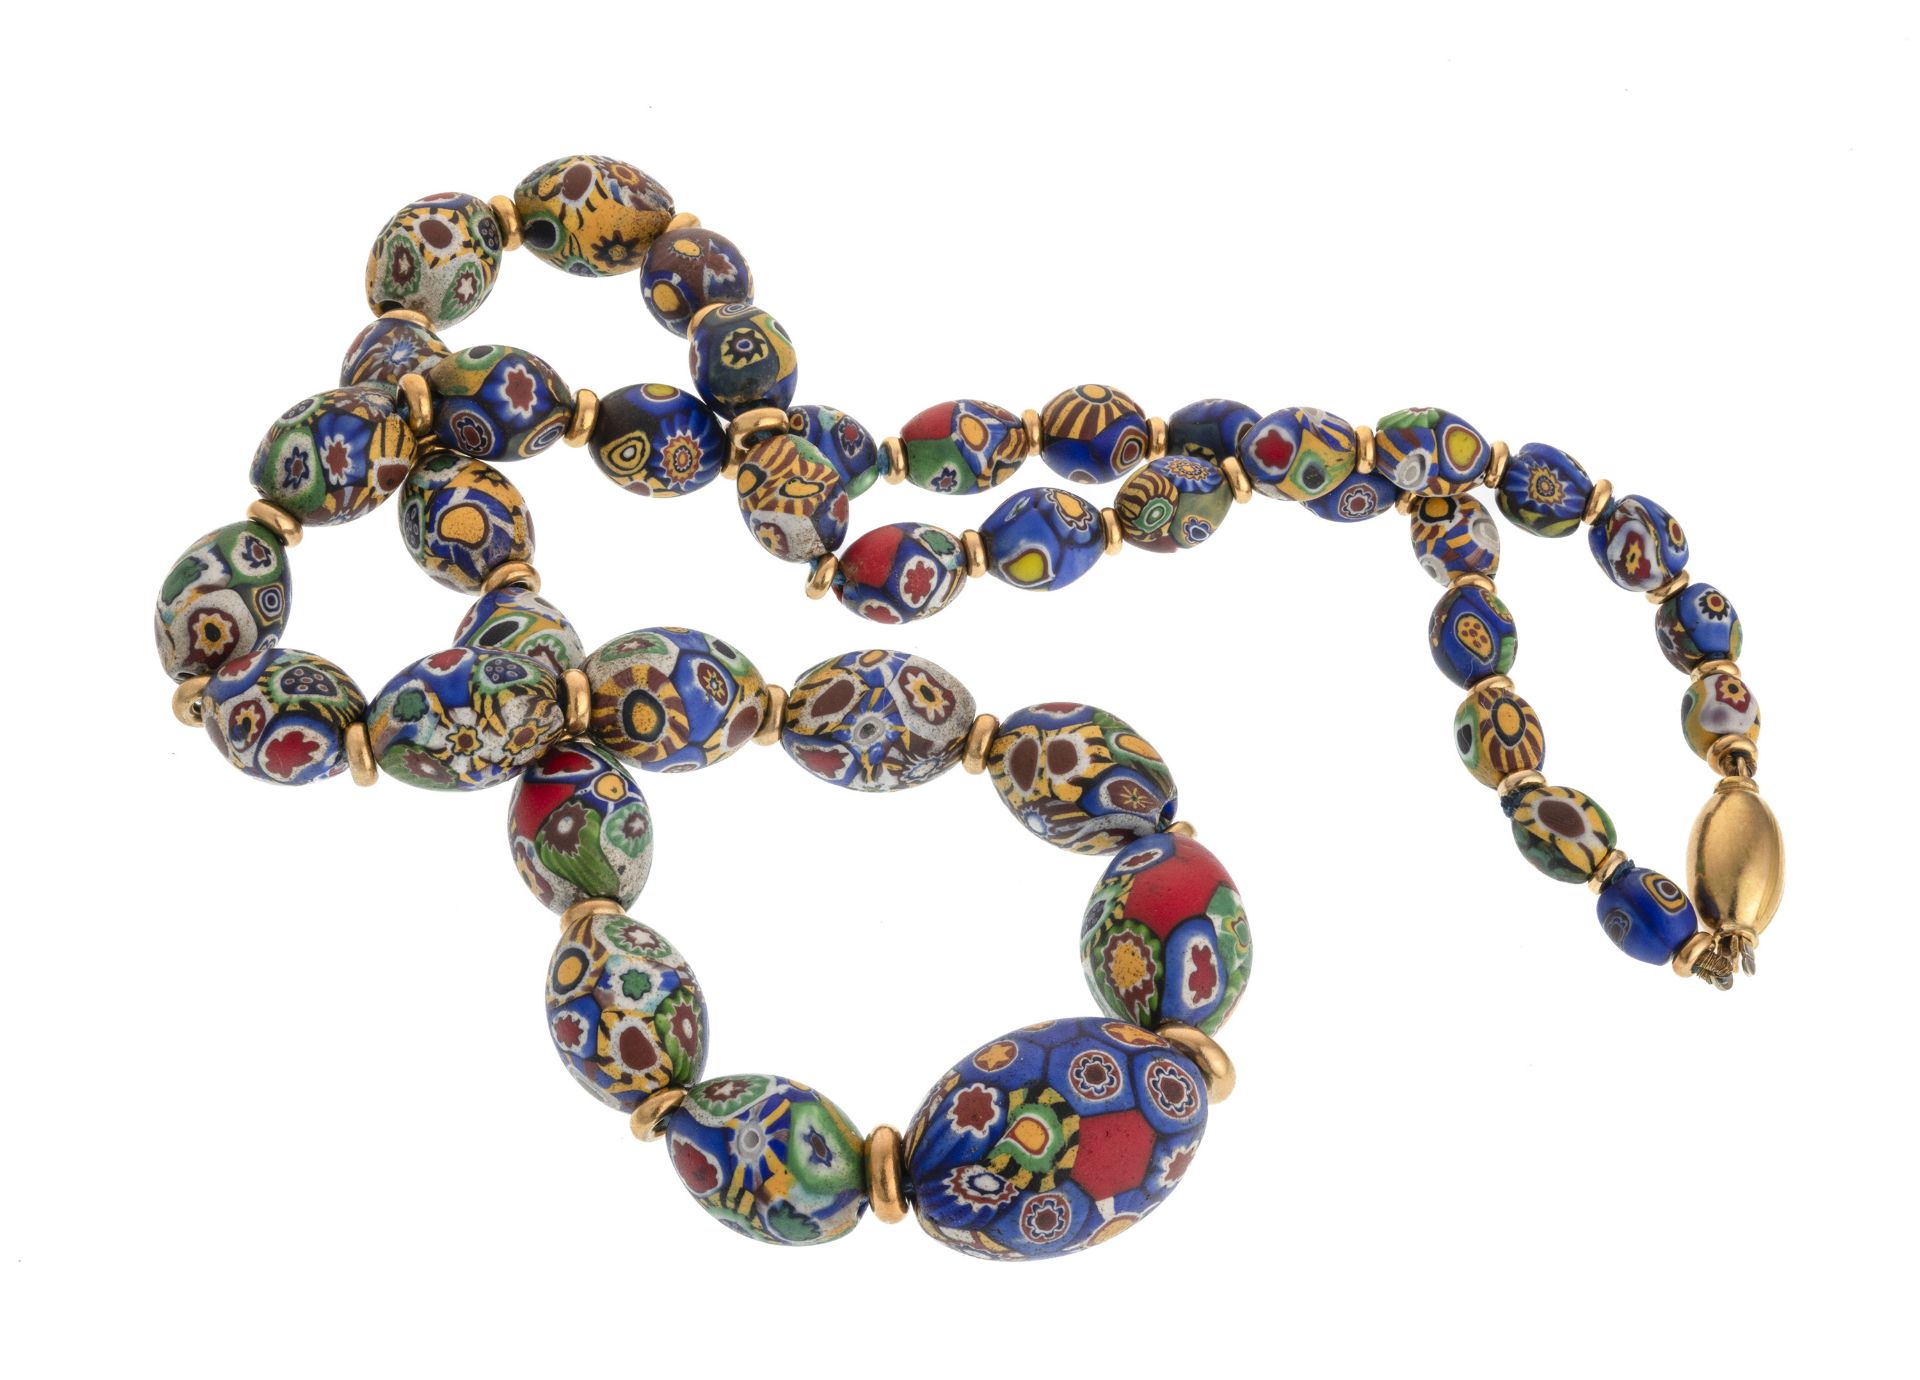 NECKLACE WITH PAINTED CERAMIC ELEMENTS